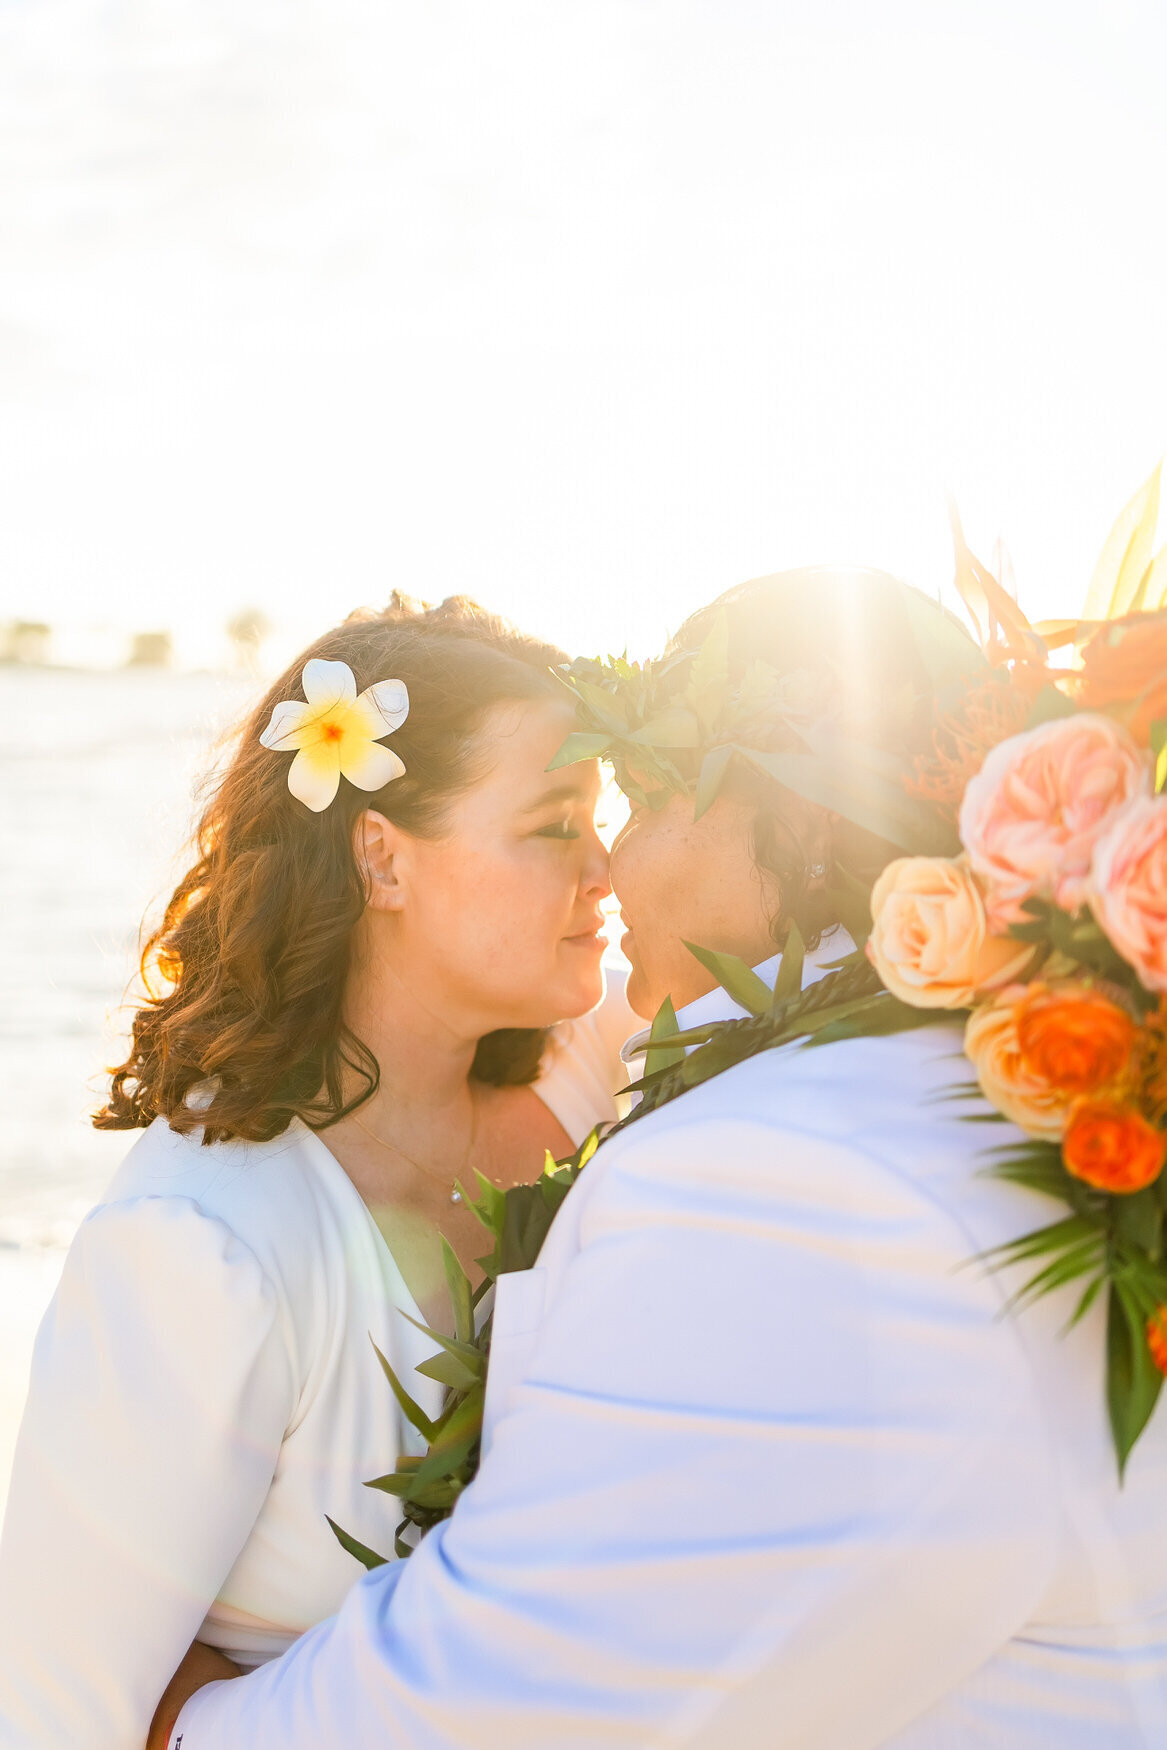 brides holdign eachother eyes closed on the beach at sunset